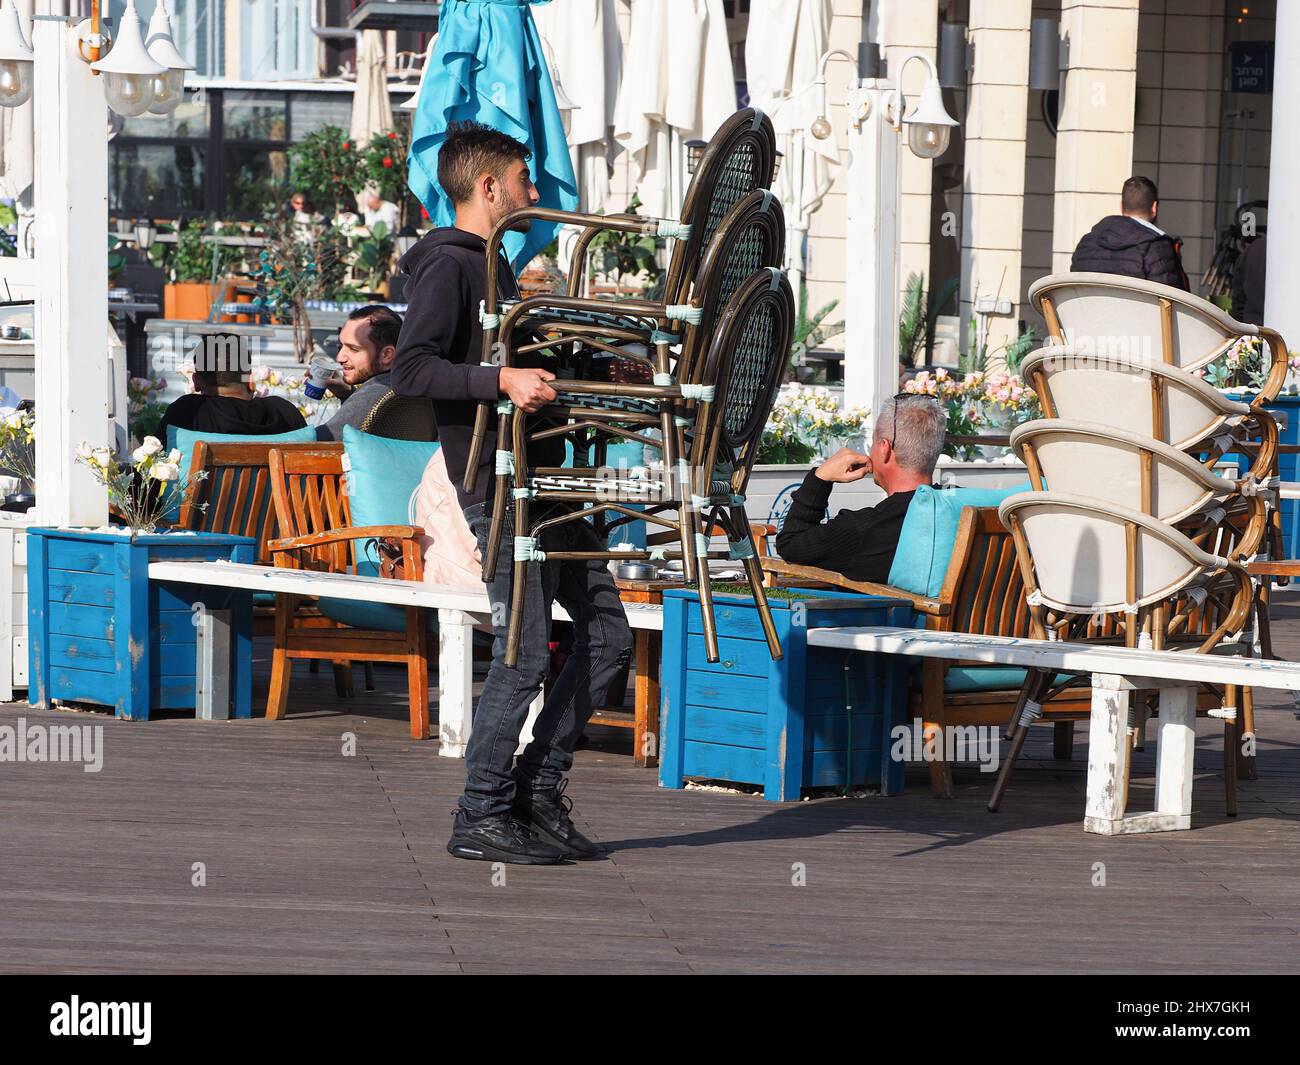 ASHKELON, ISRAEL - MARCH 04, 2022: A restaurant worker collects chairs in a street cafe. Stock Photo